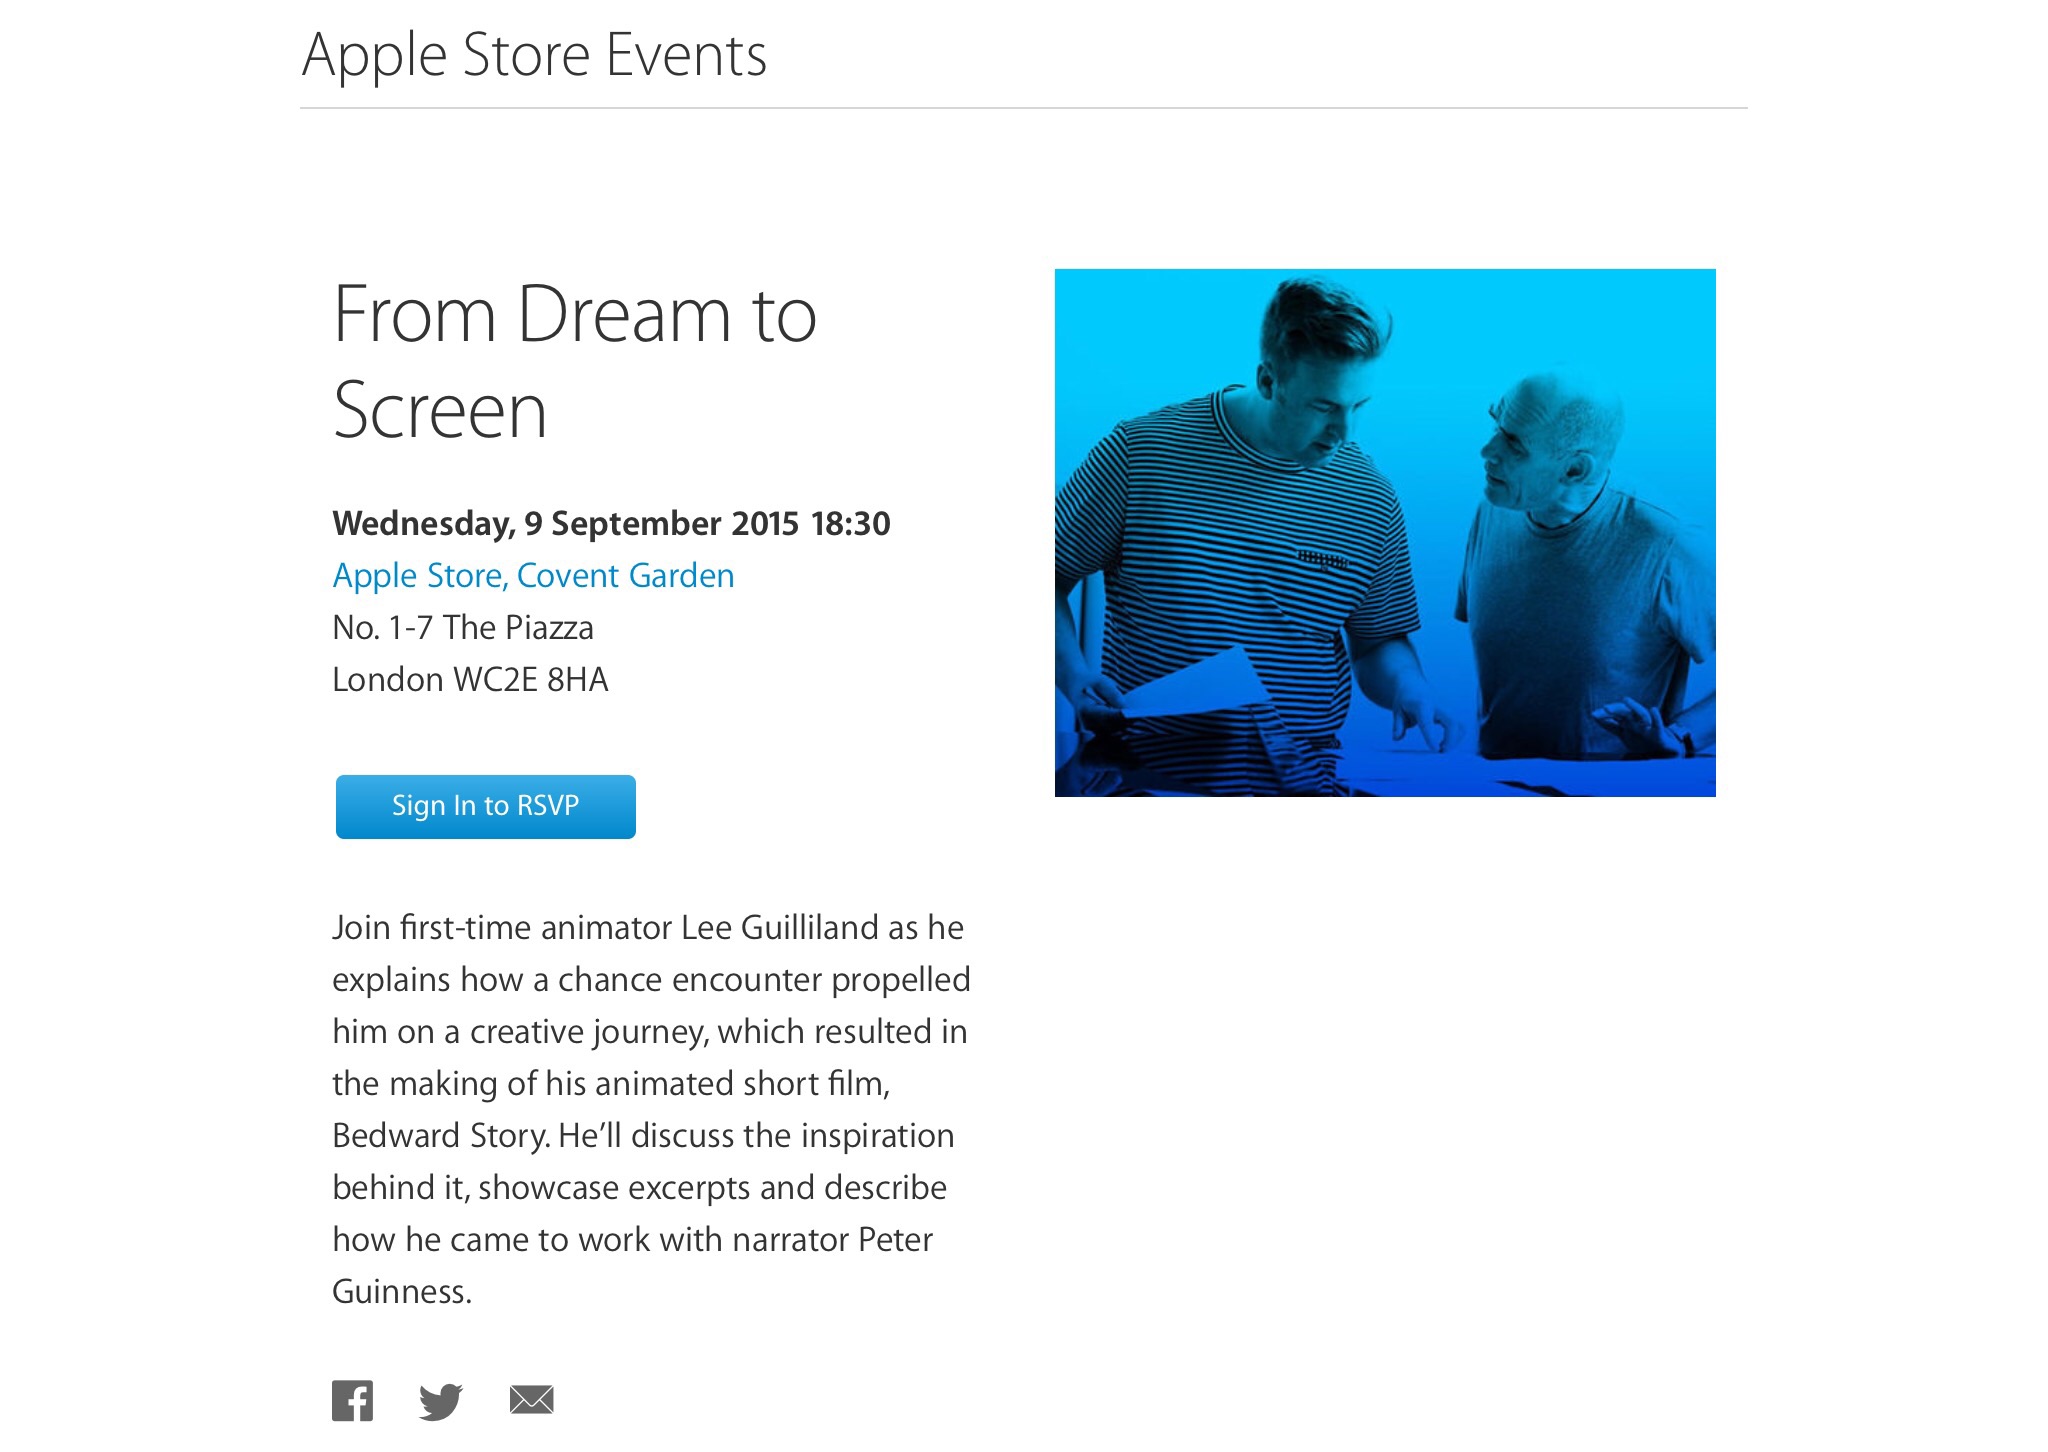 From Dream to Screen, Apple talk about my creative journey making Bedward Story.